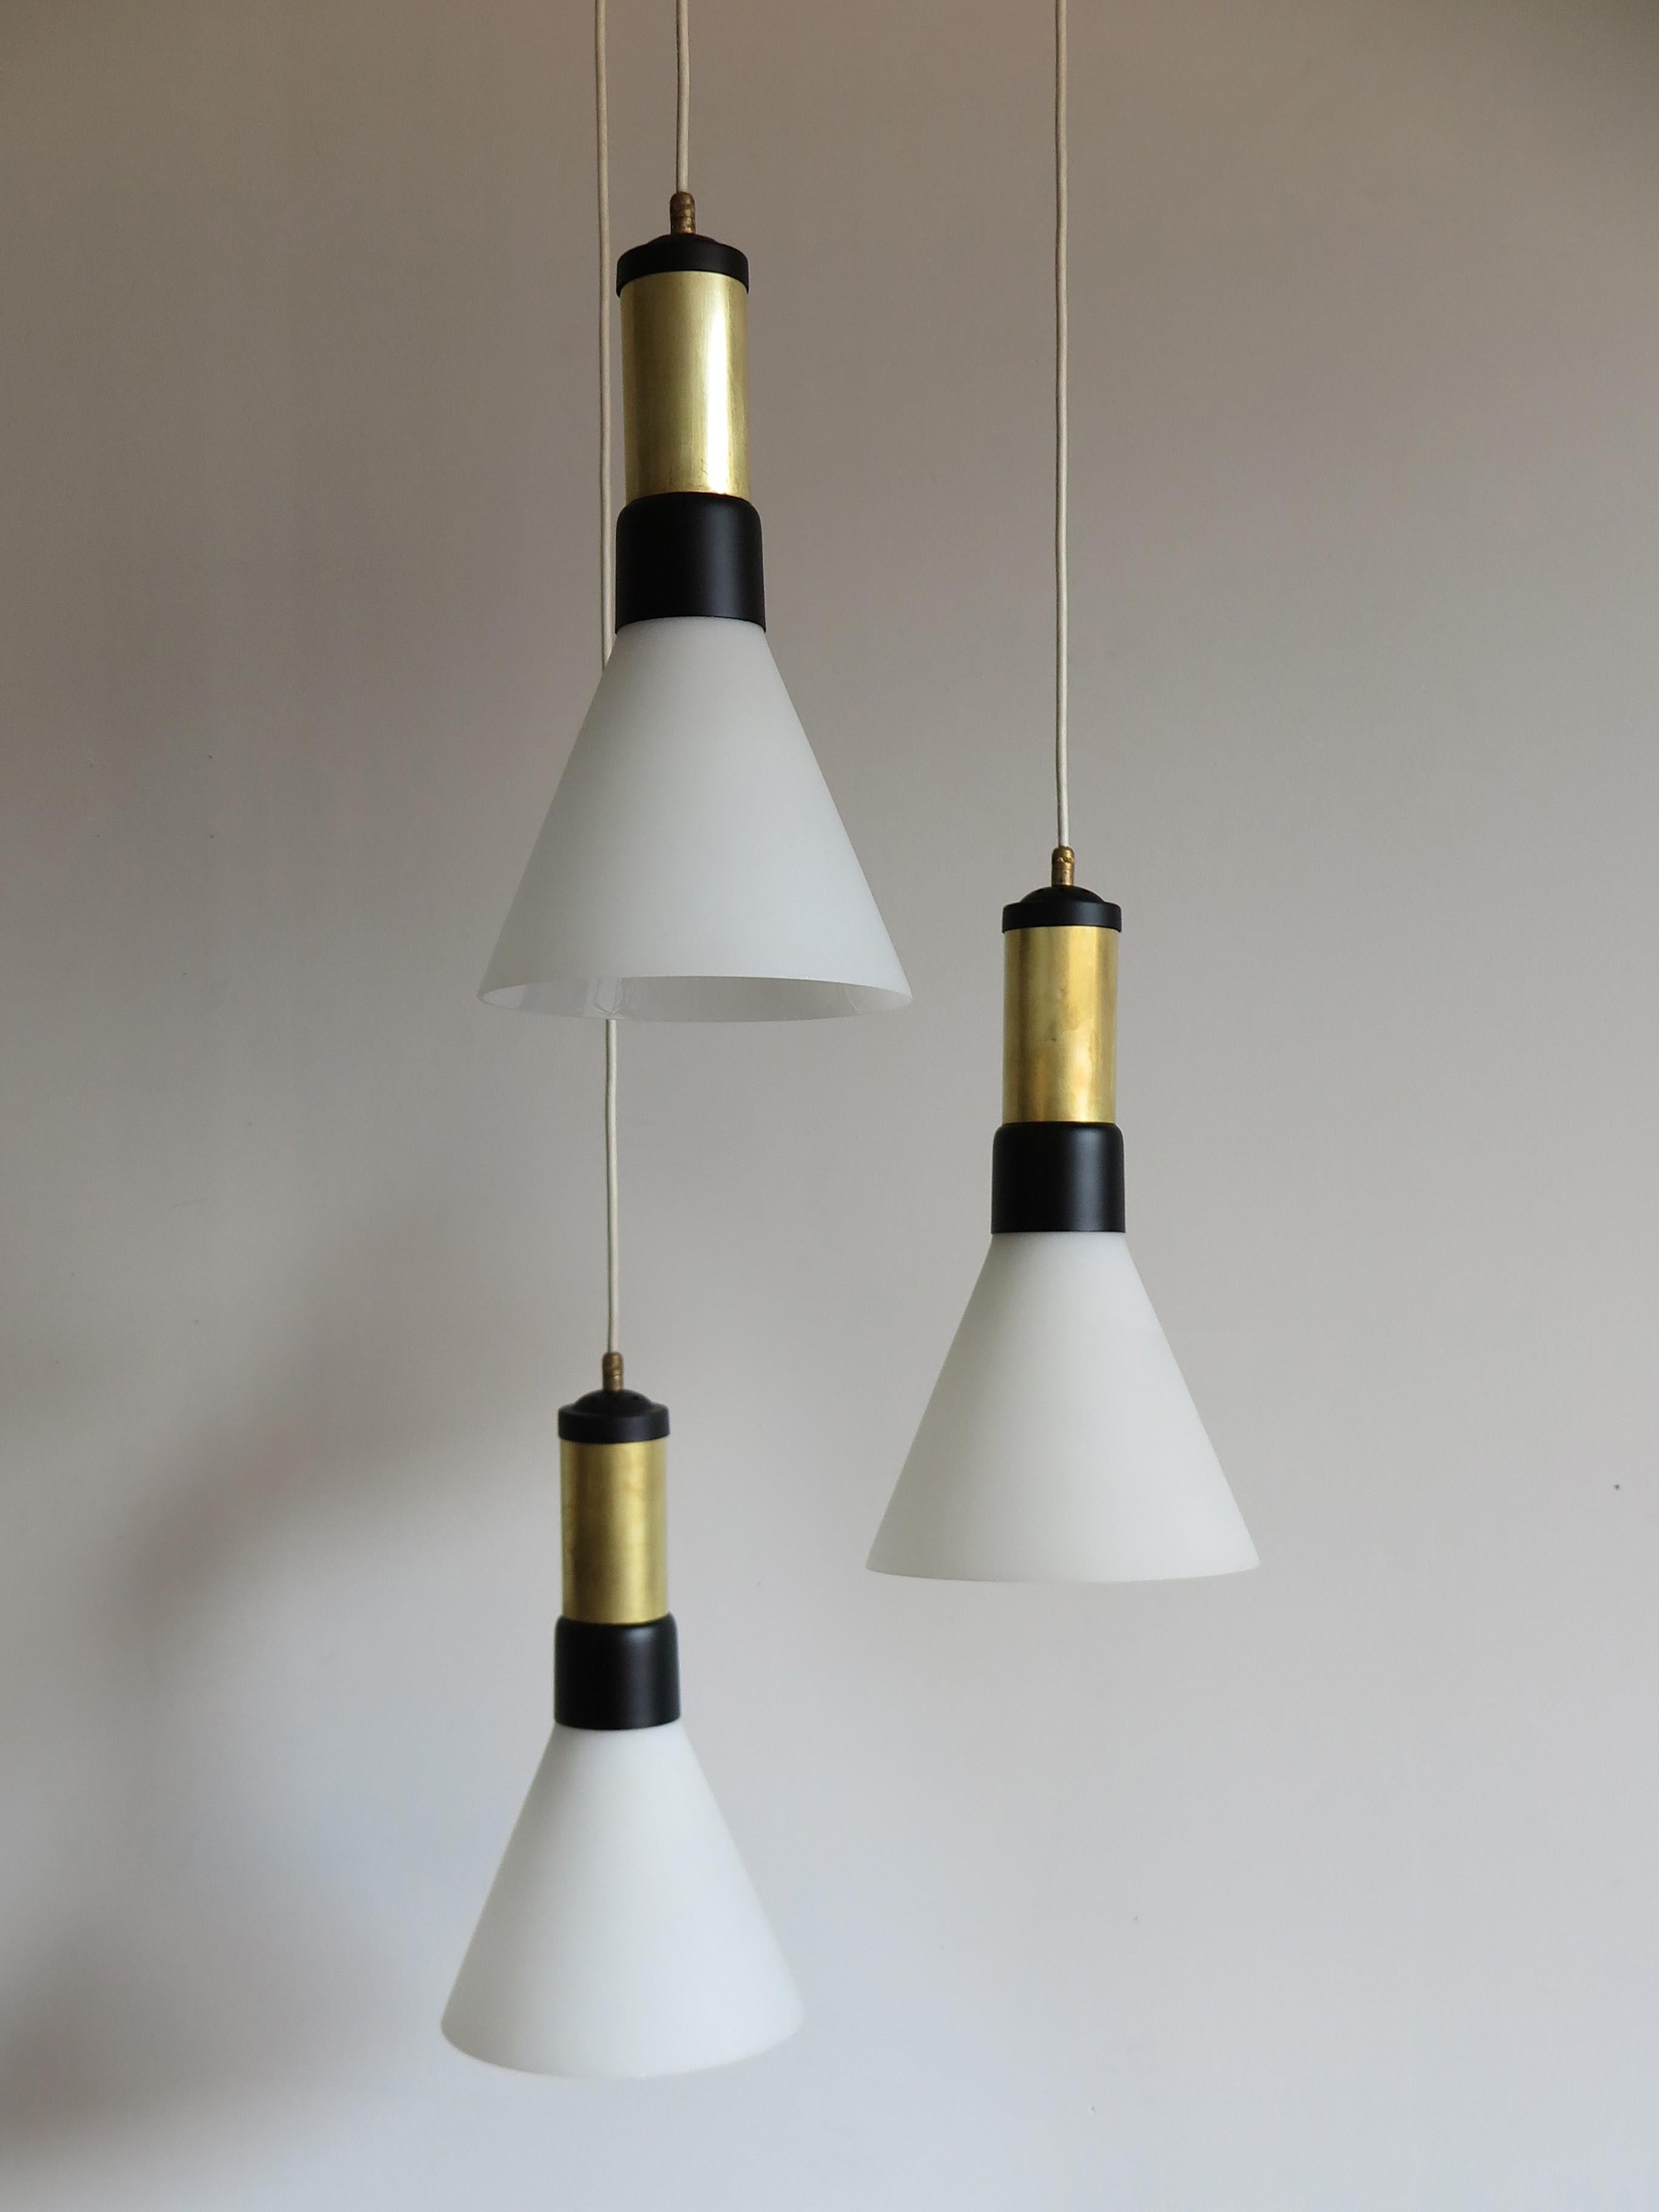 Italian Mid-Century Modern design pendant lamp produced by Stilnovo Milano with opal glass, brass and enameled metal, circa 1950s.

Please note that the lamp is original of the period and thus shows normal signs of age and use.